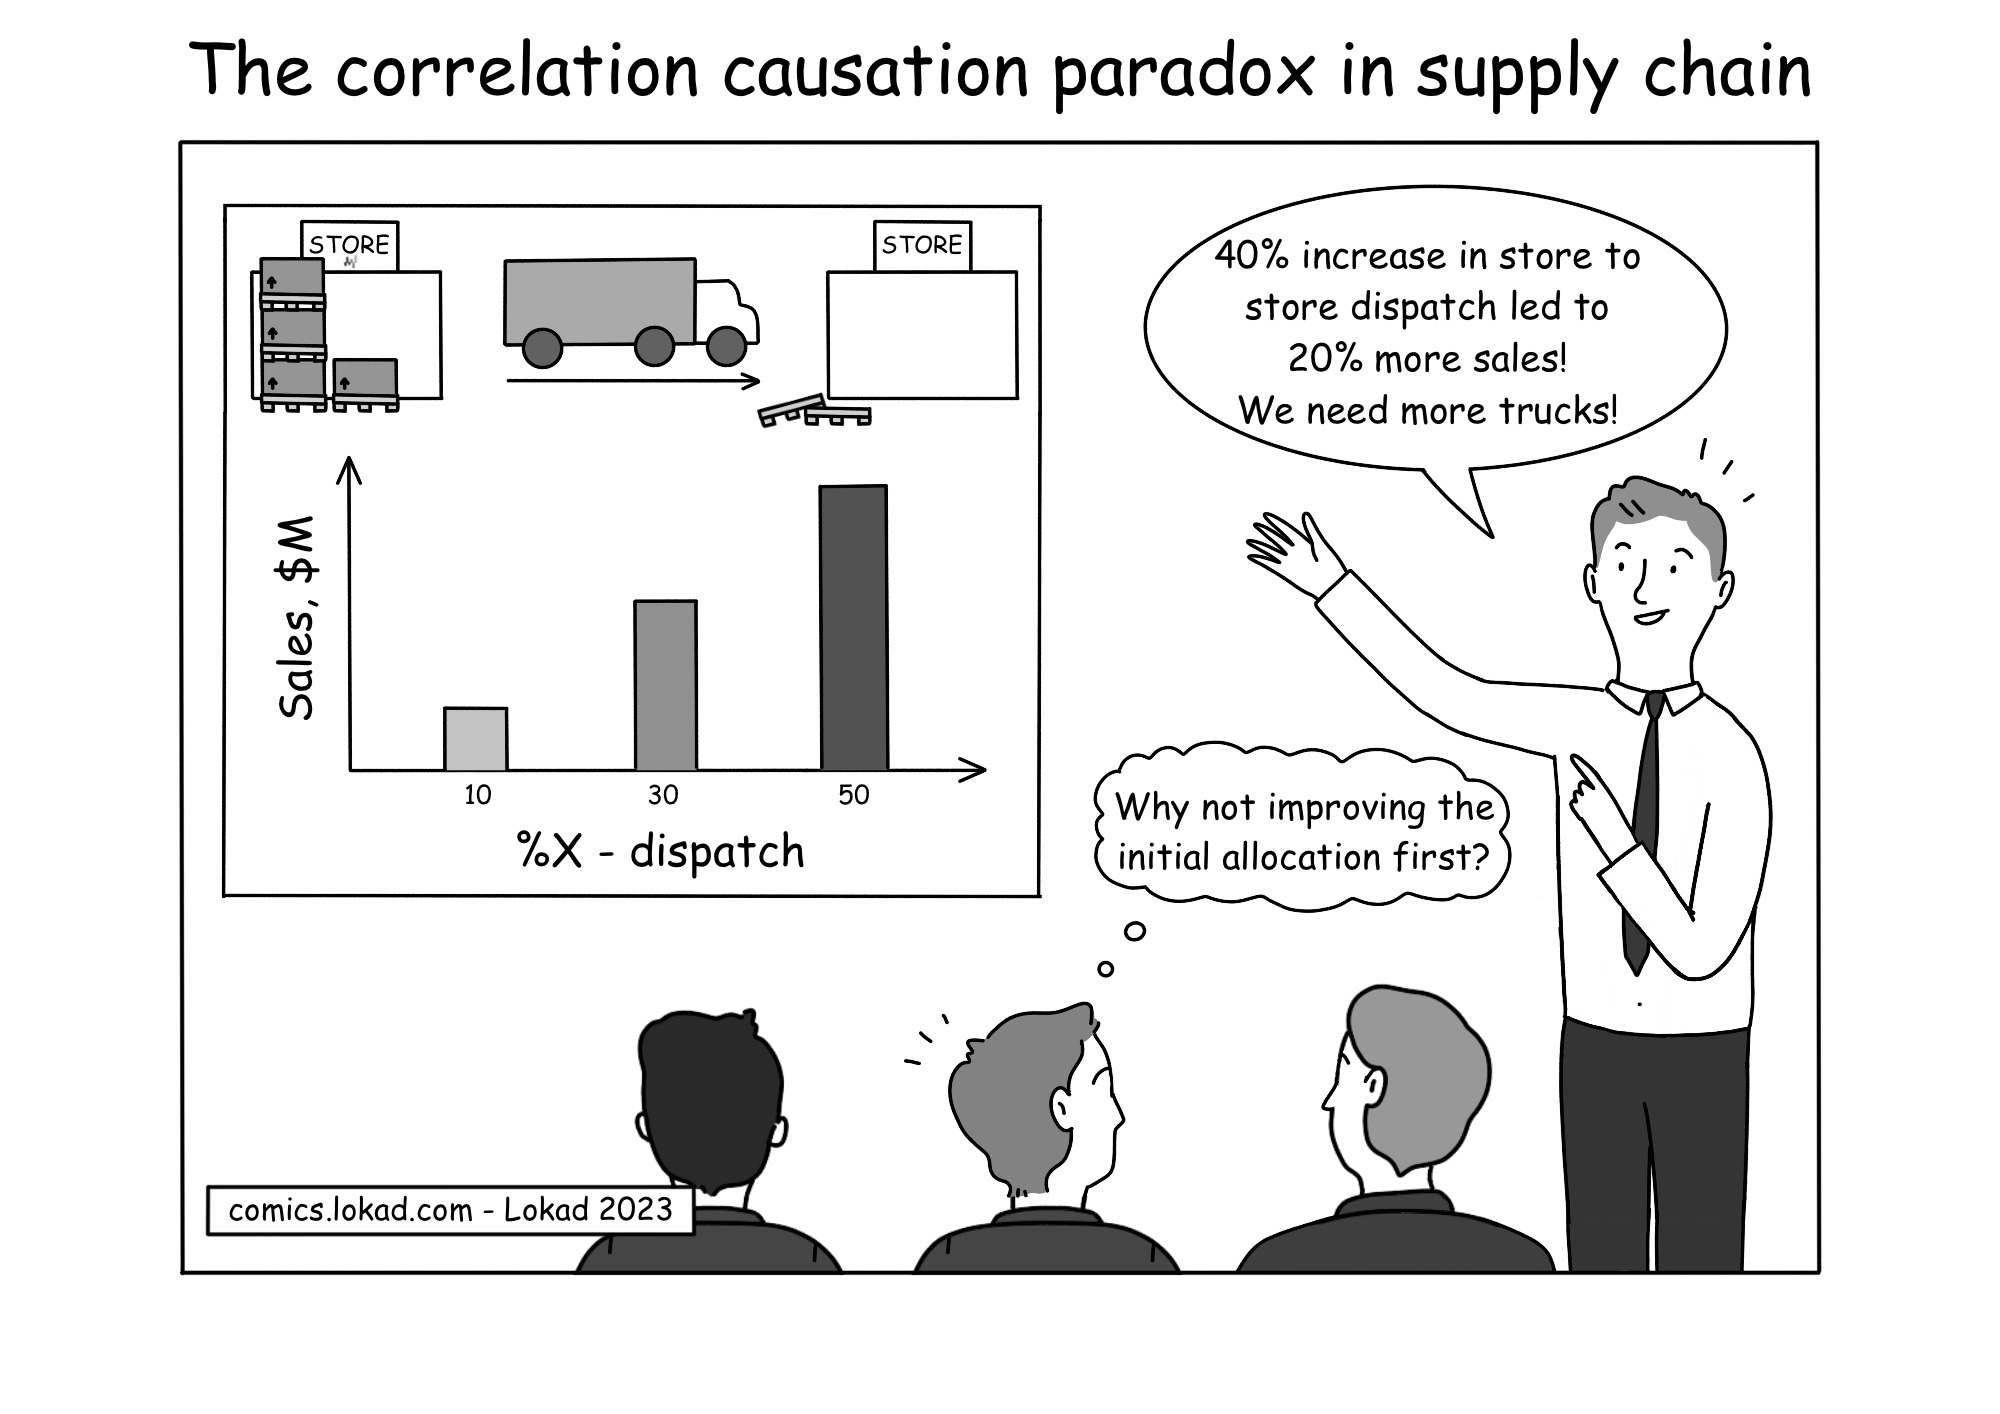 The correlation causation paradox in supply chain